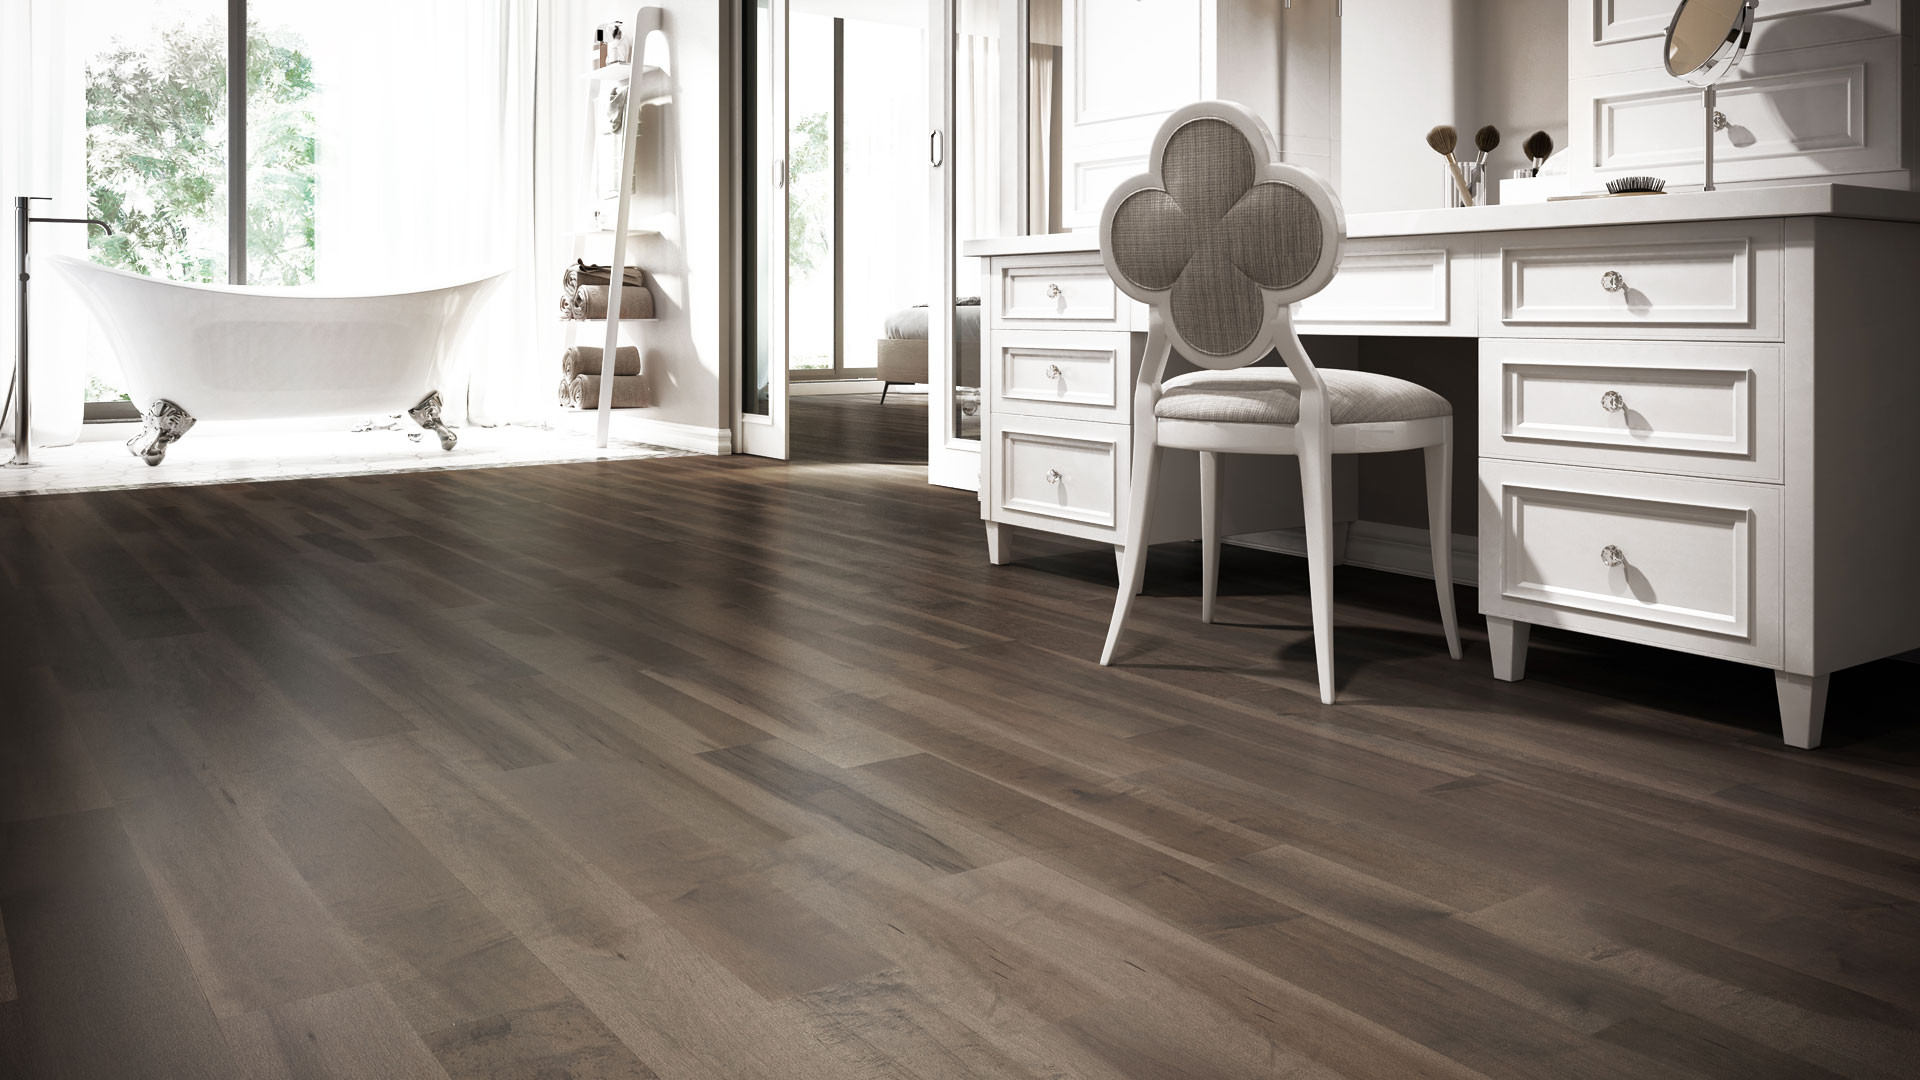 14 attractive Hardwood Floor Pattern Names 2024 free download hardwood floor pattern names of 4 latest hardwood flooring trends lauzon flooring regarding learn more about our pure genius by reading our blog post the smartest hardwood flooring weve ever